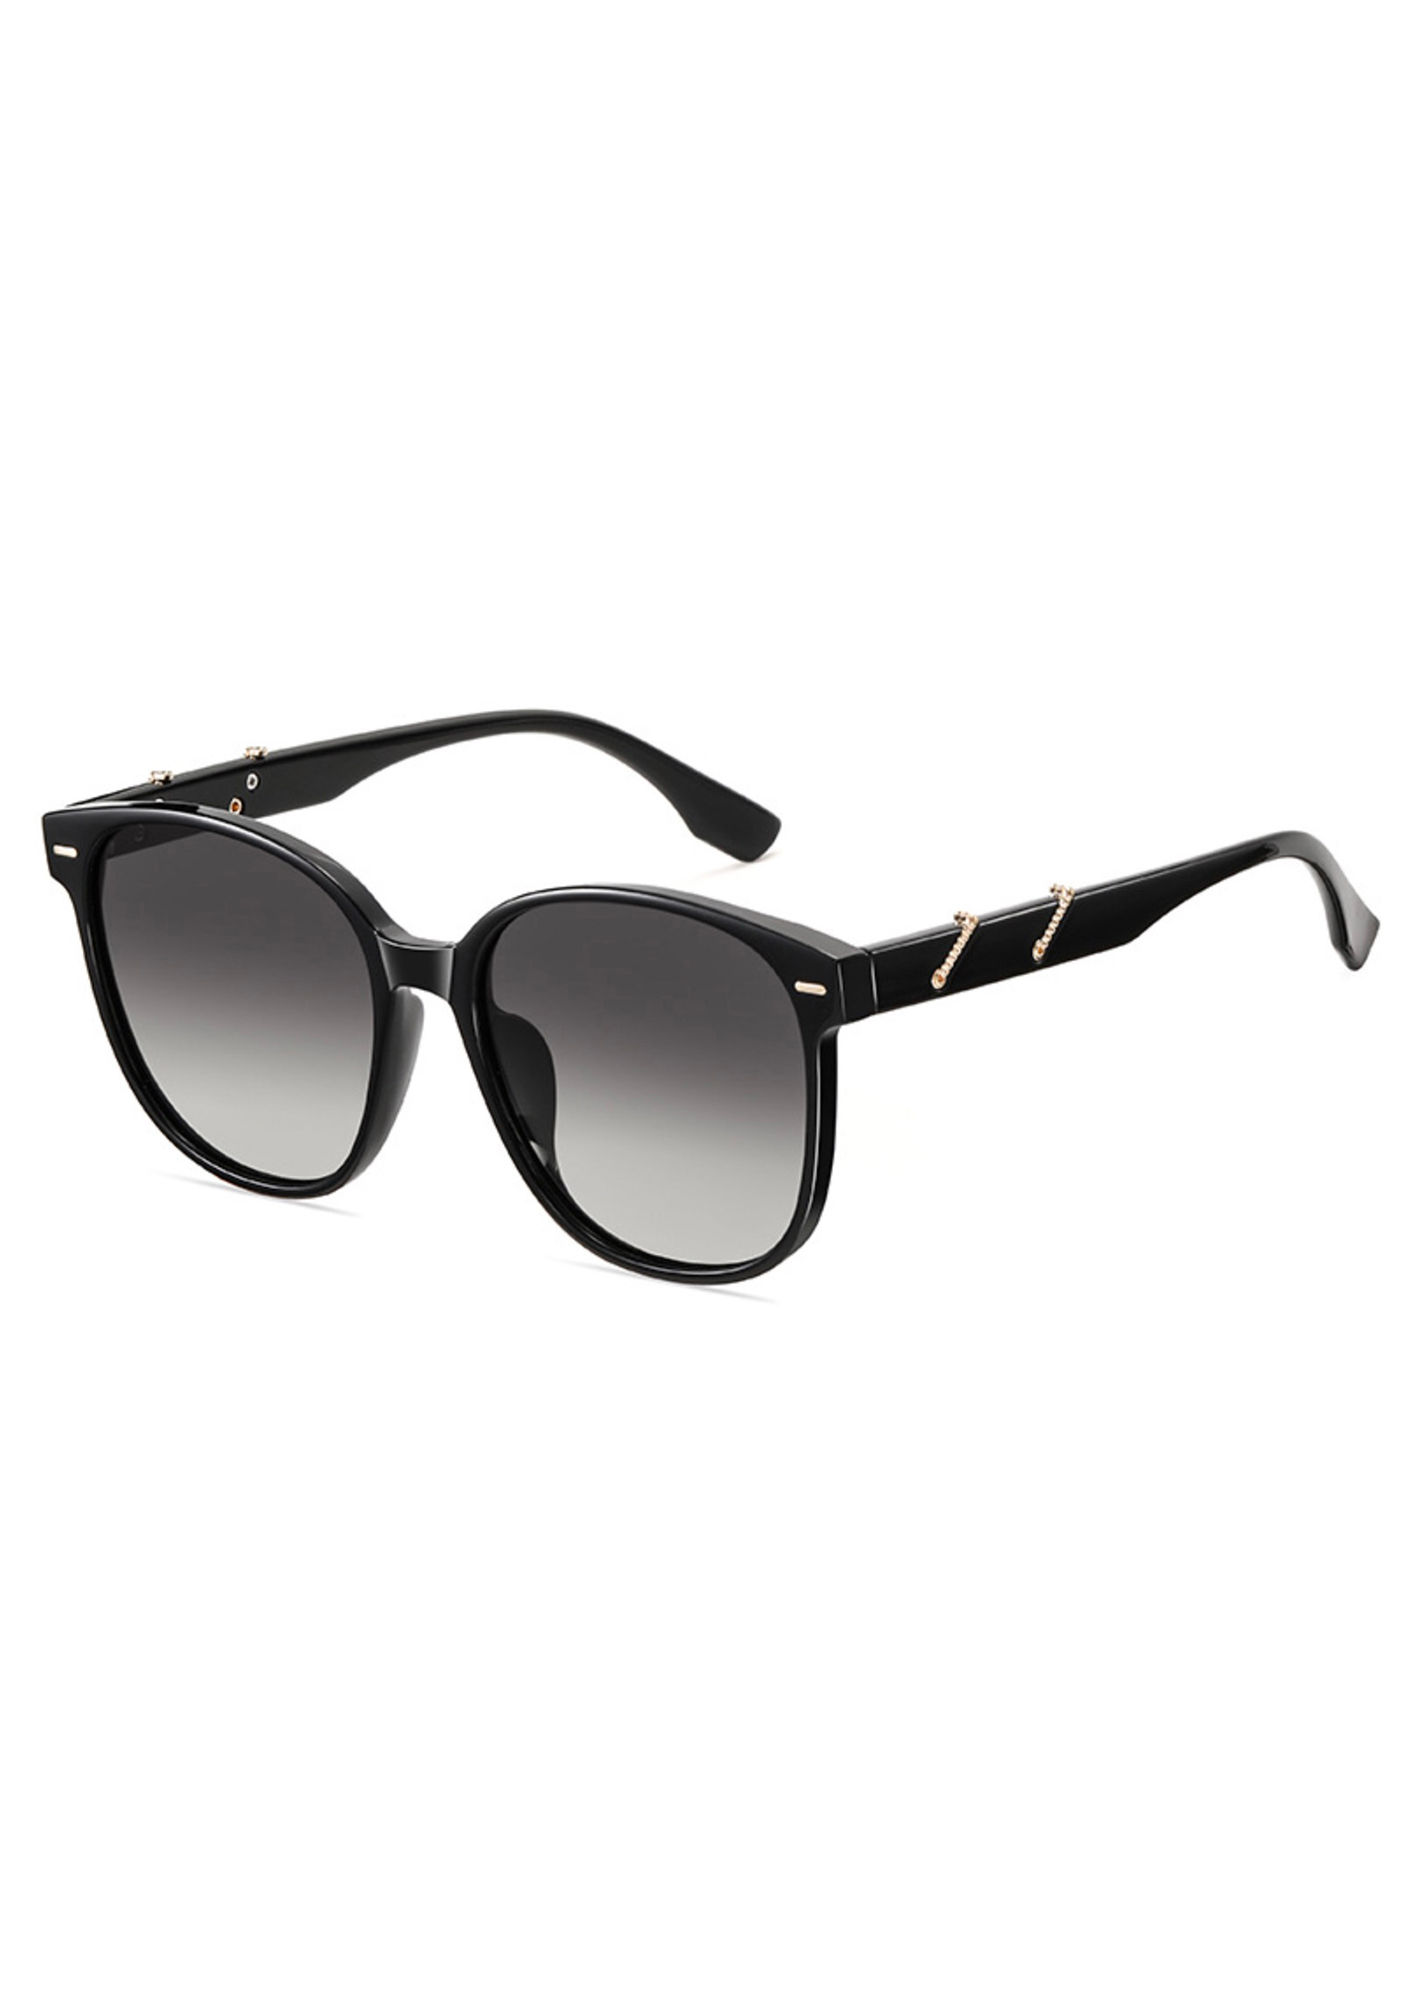 Sunglasses Persol - Spotted round frame sunglasses - 3092SM904851